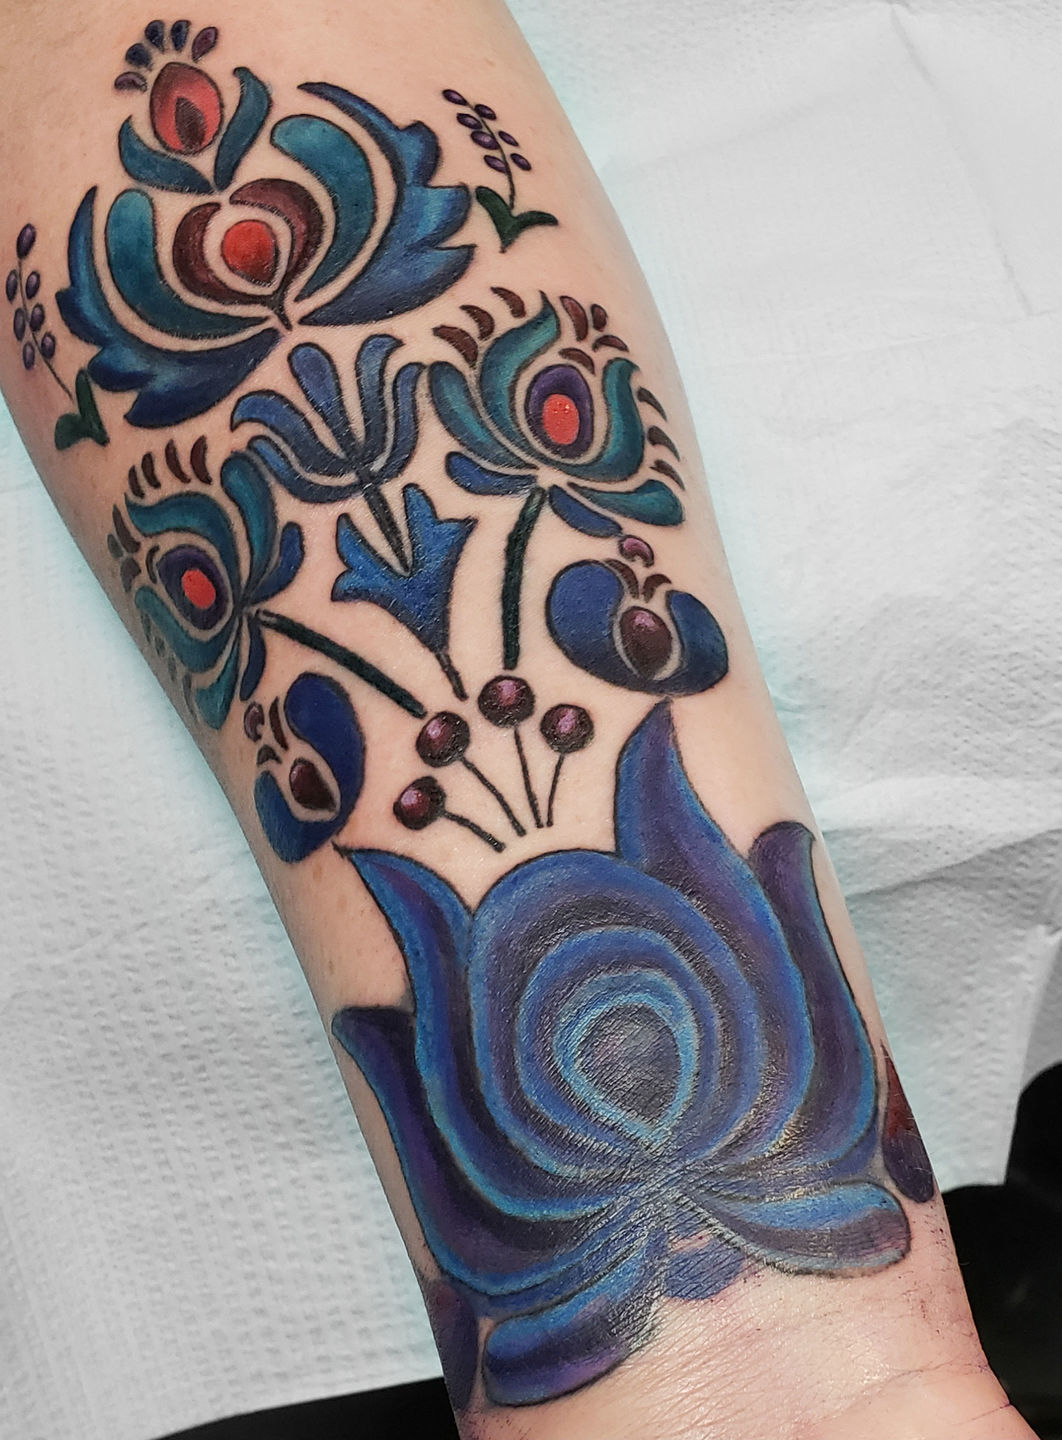 Hungarian folk art inspired tattoo done by Becca Genne Bacon at The End is  Near in Brooklyn NY  Art inspired tattoos Sleeve tattoos Tattoos